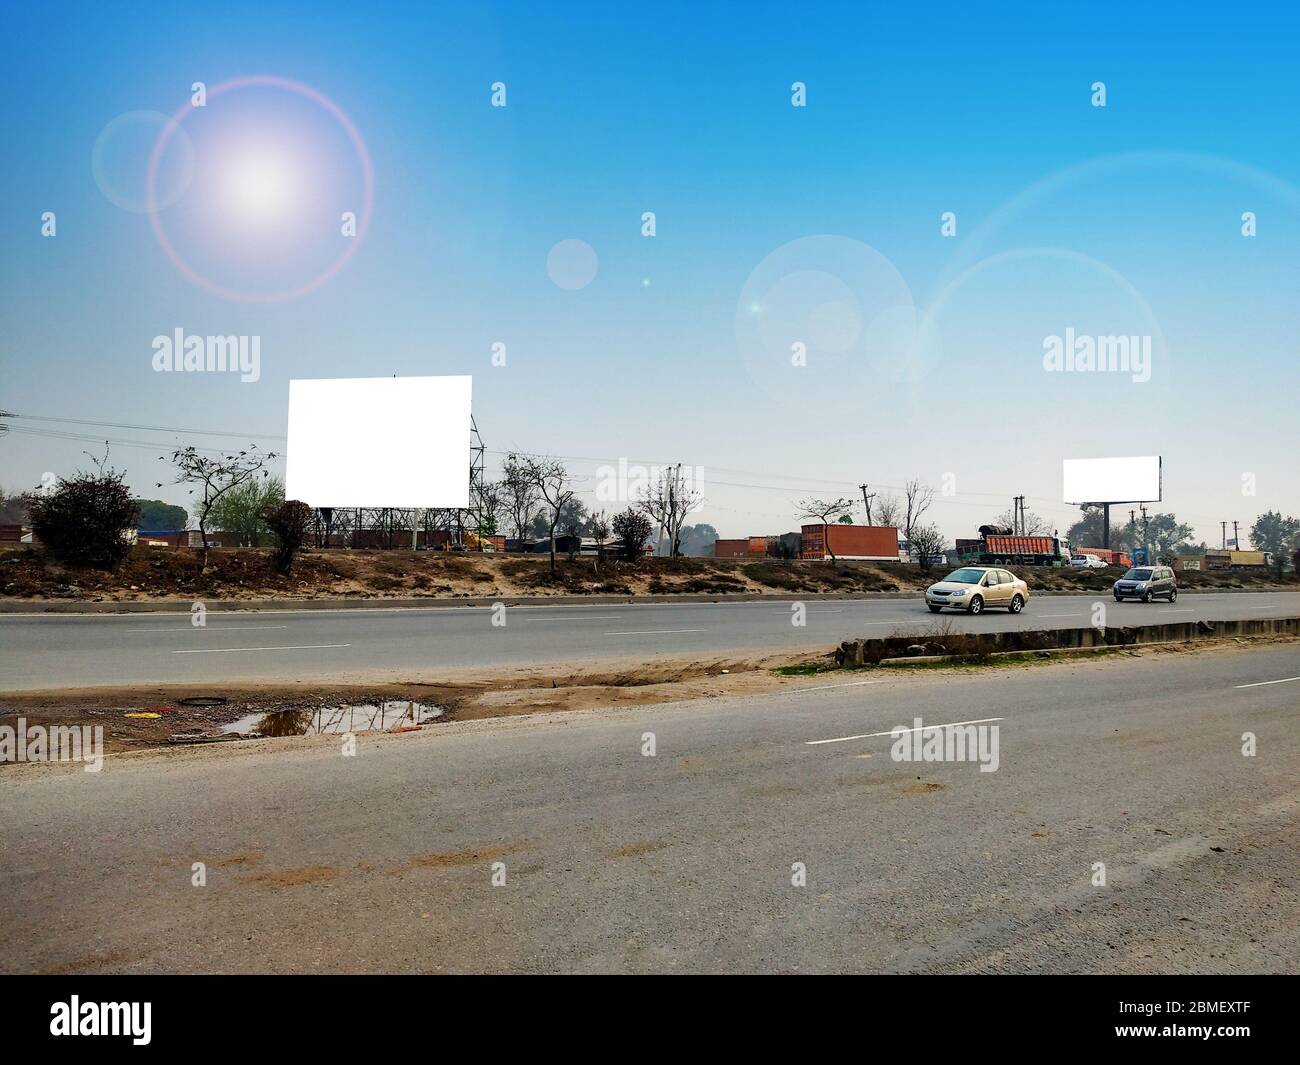 Blank white billboard advertisement space available for promotion Stock Photo